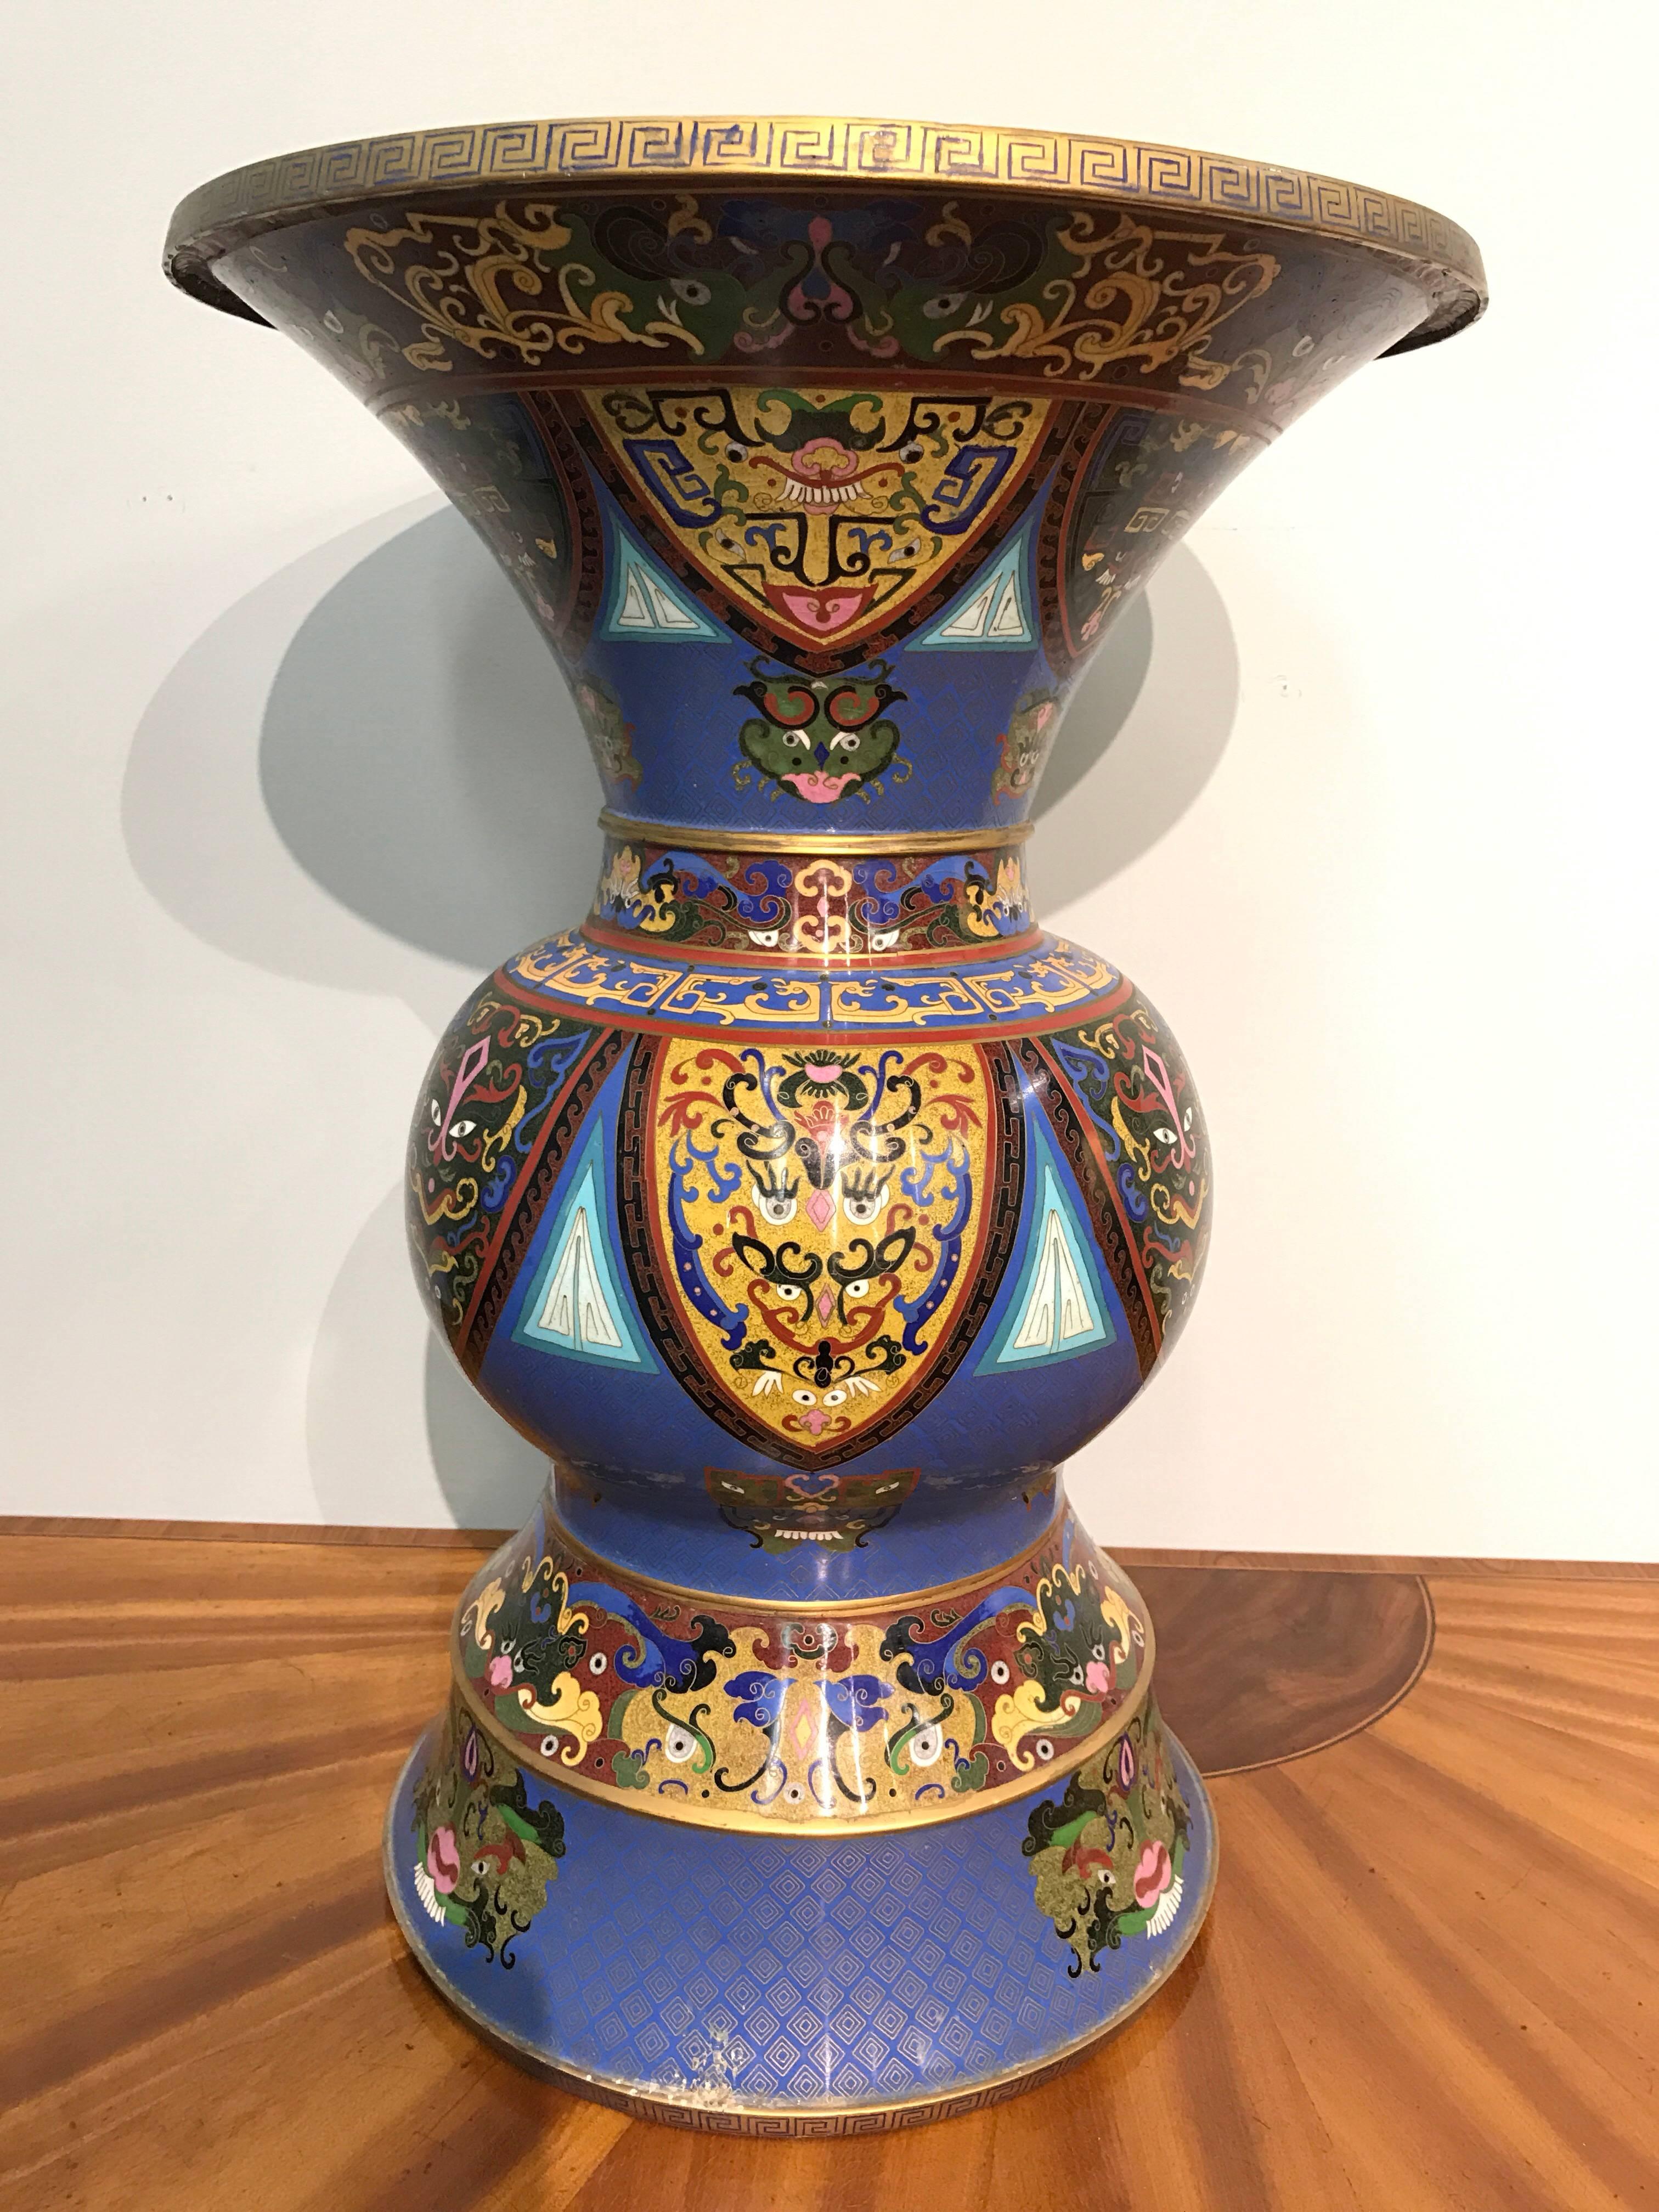 Metal Pair of Large Chinese Cloisonné Enameled Urns Vases